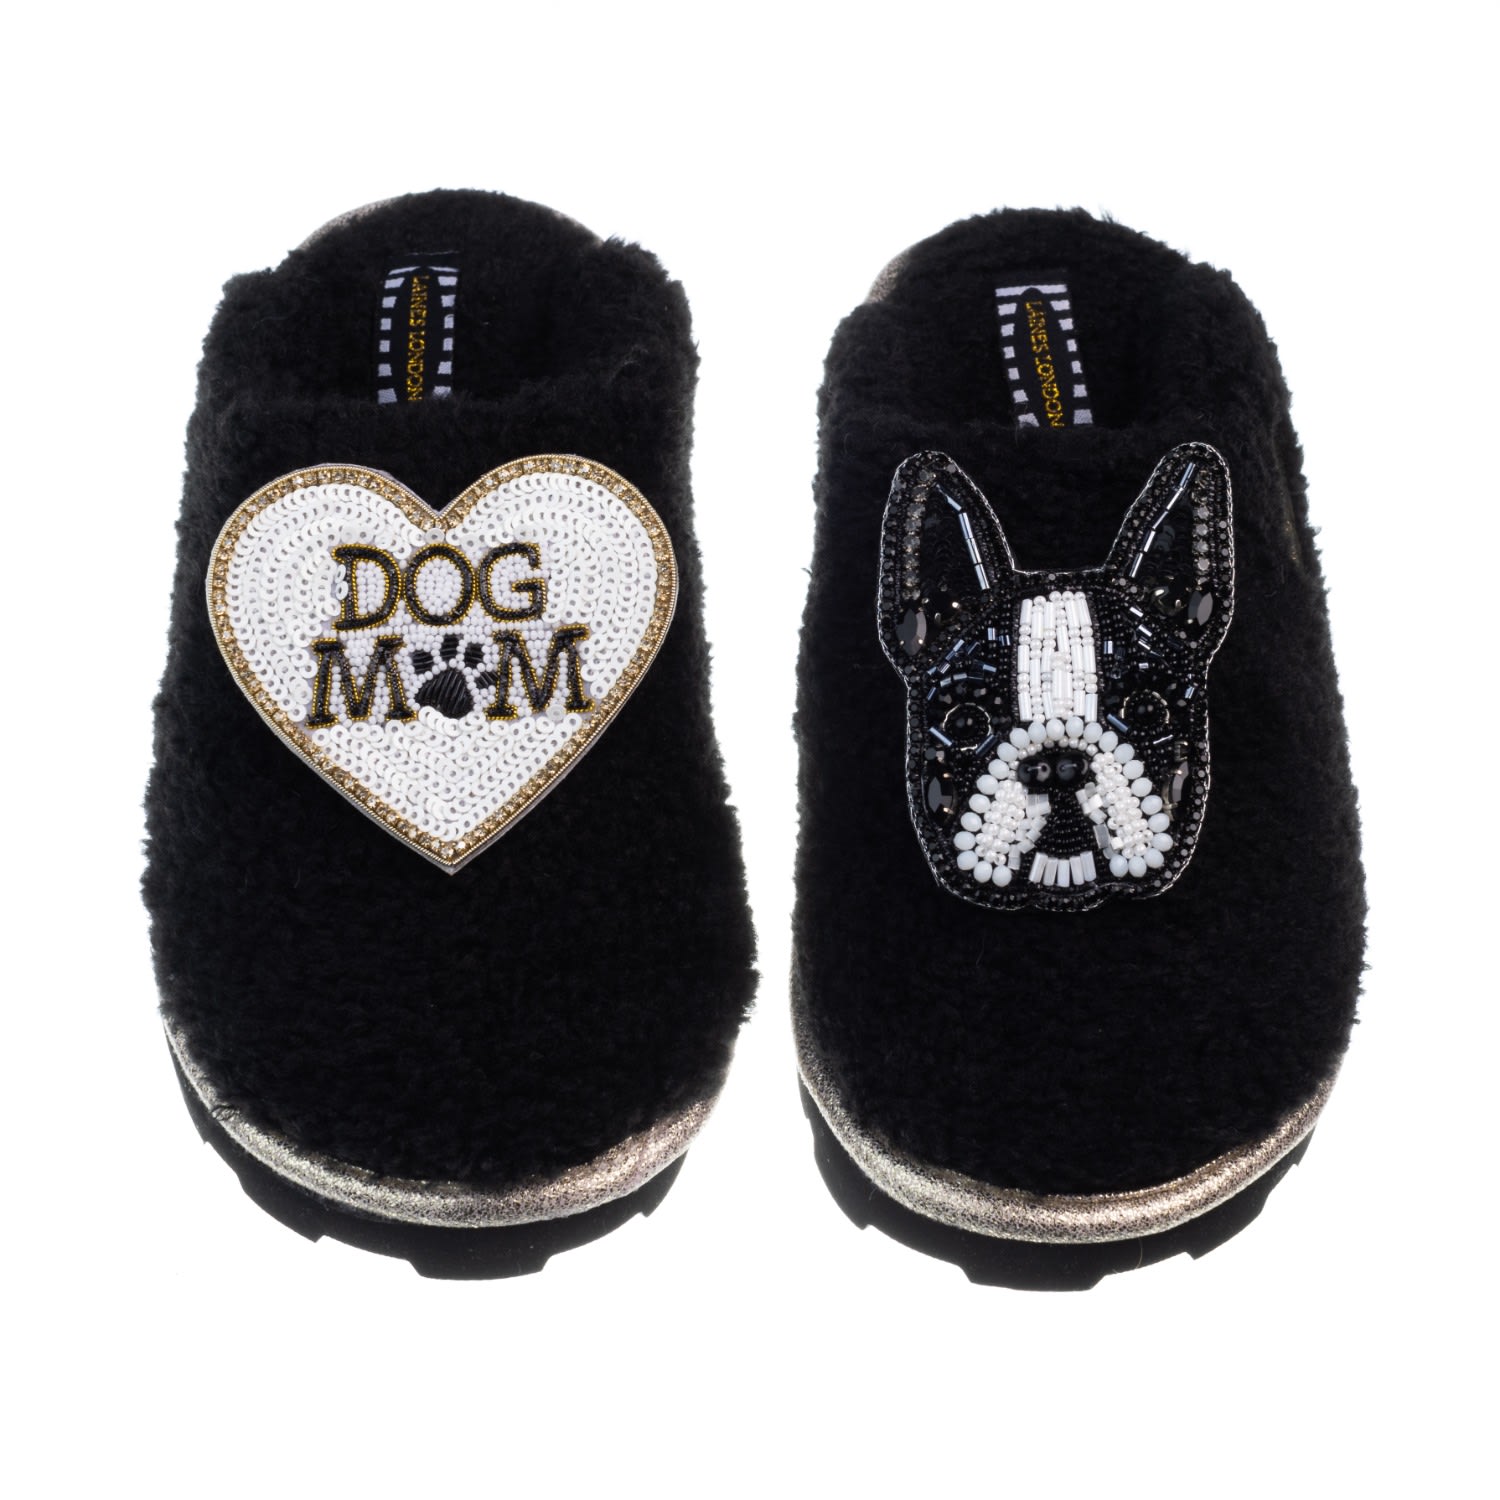 Laines London Women's Teddy Closed Toe Slippers With Buddy The Boston Terrier & Dog Mum / Mom Brooches - Black